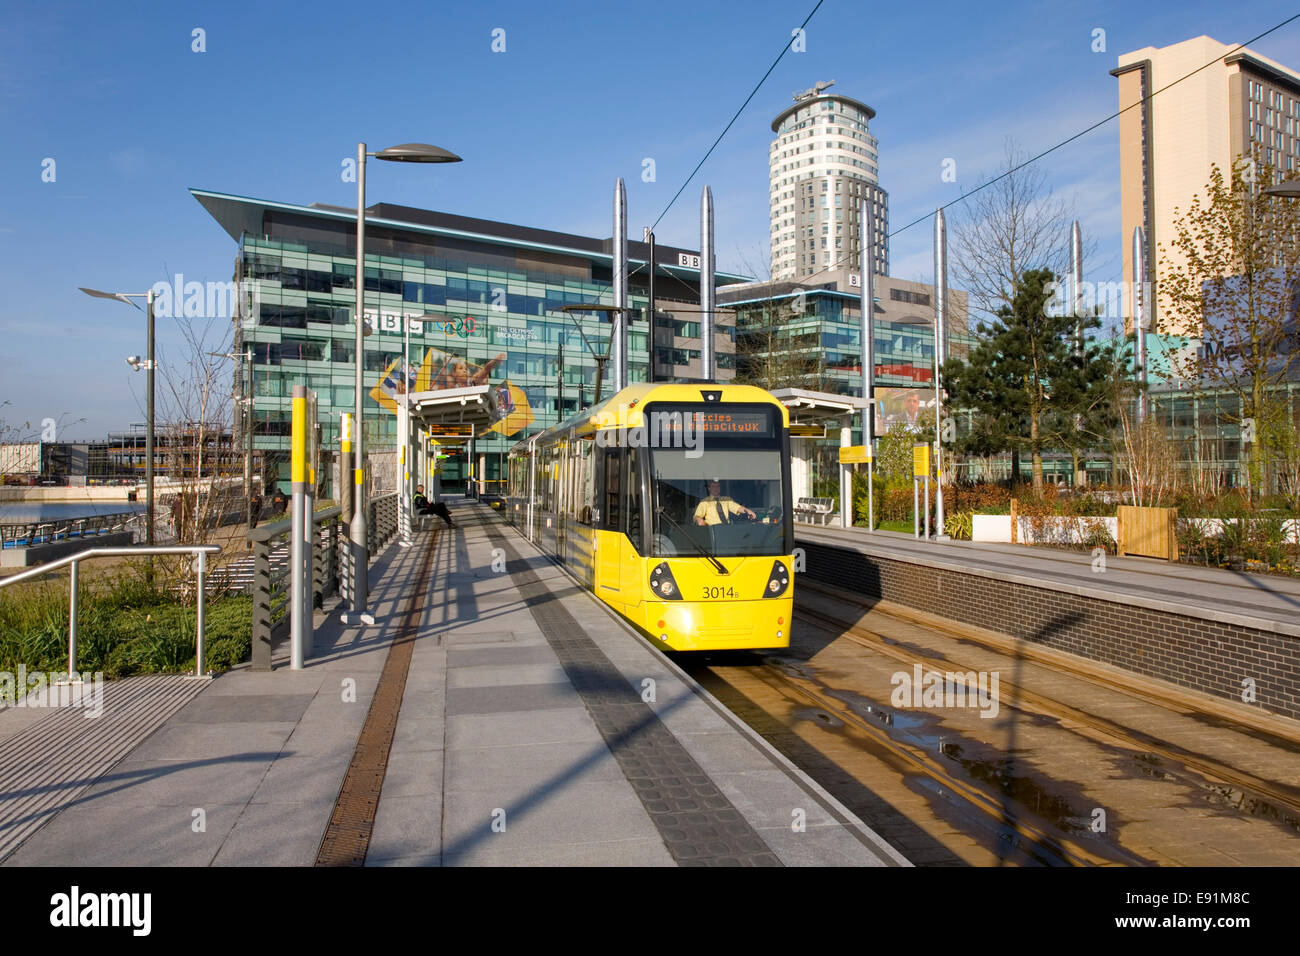 Salford Quays, Greater Manchester, England. Tram departing from the MediaCityUK Metrolink station. Stock Photo